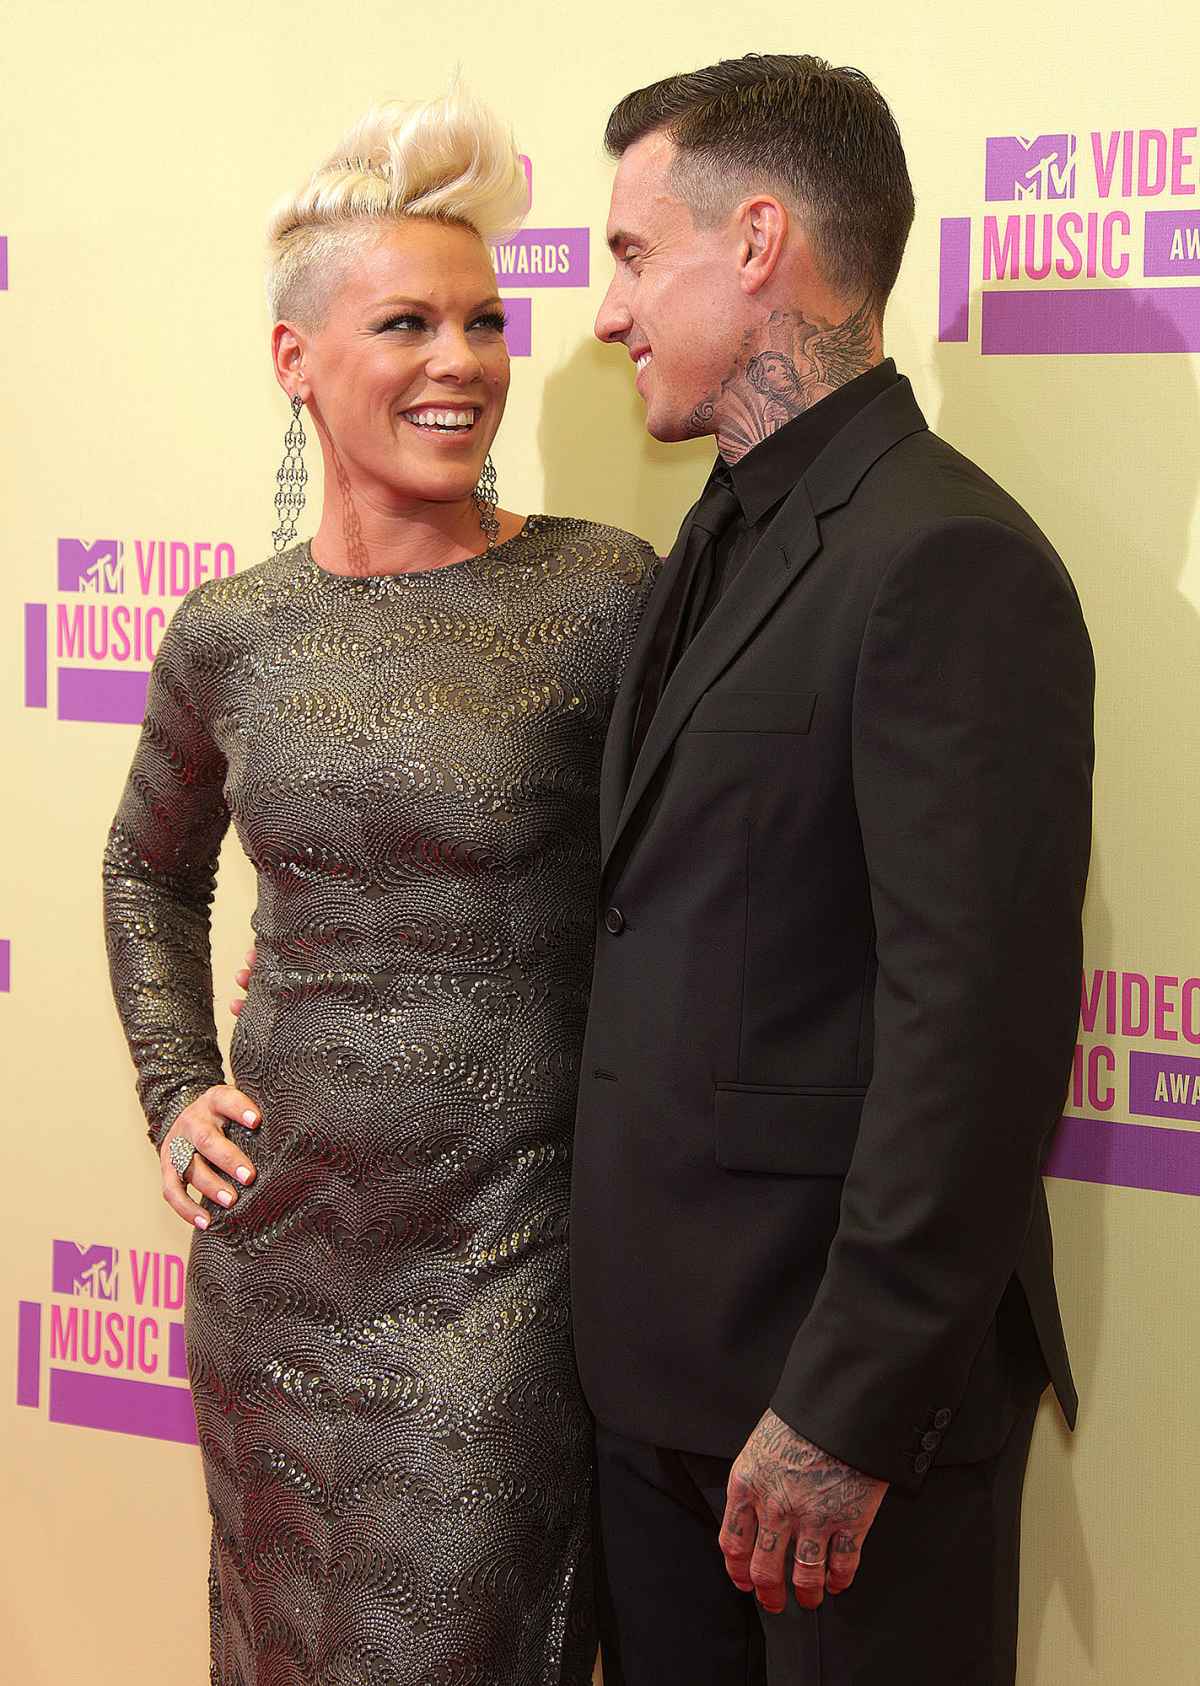 Carey Hart Hopes Pink Film Changes His 'Tattooed Scumbag' Image